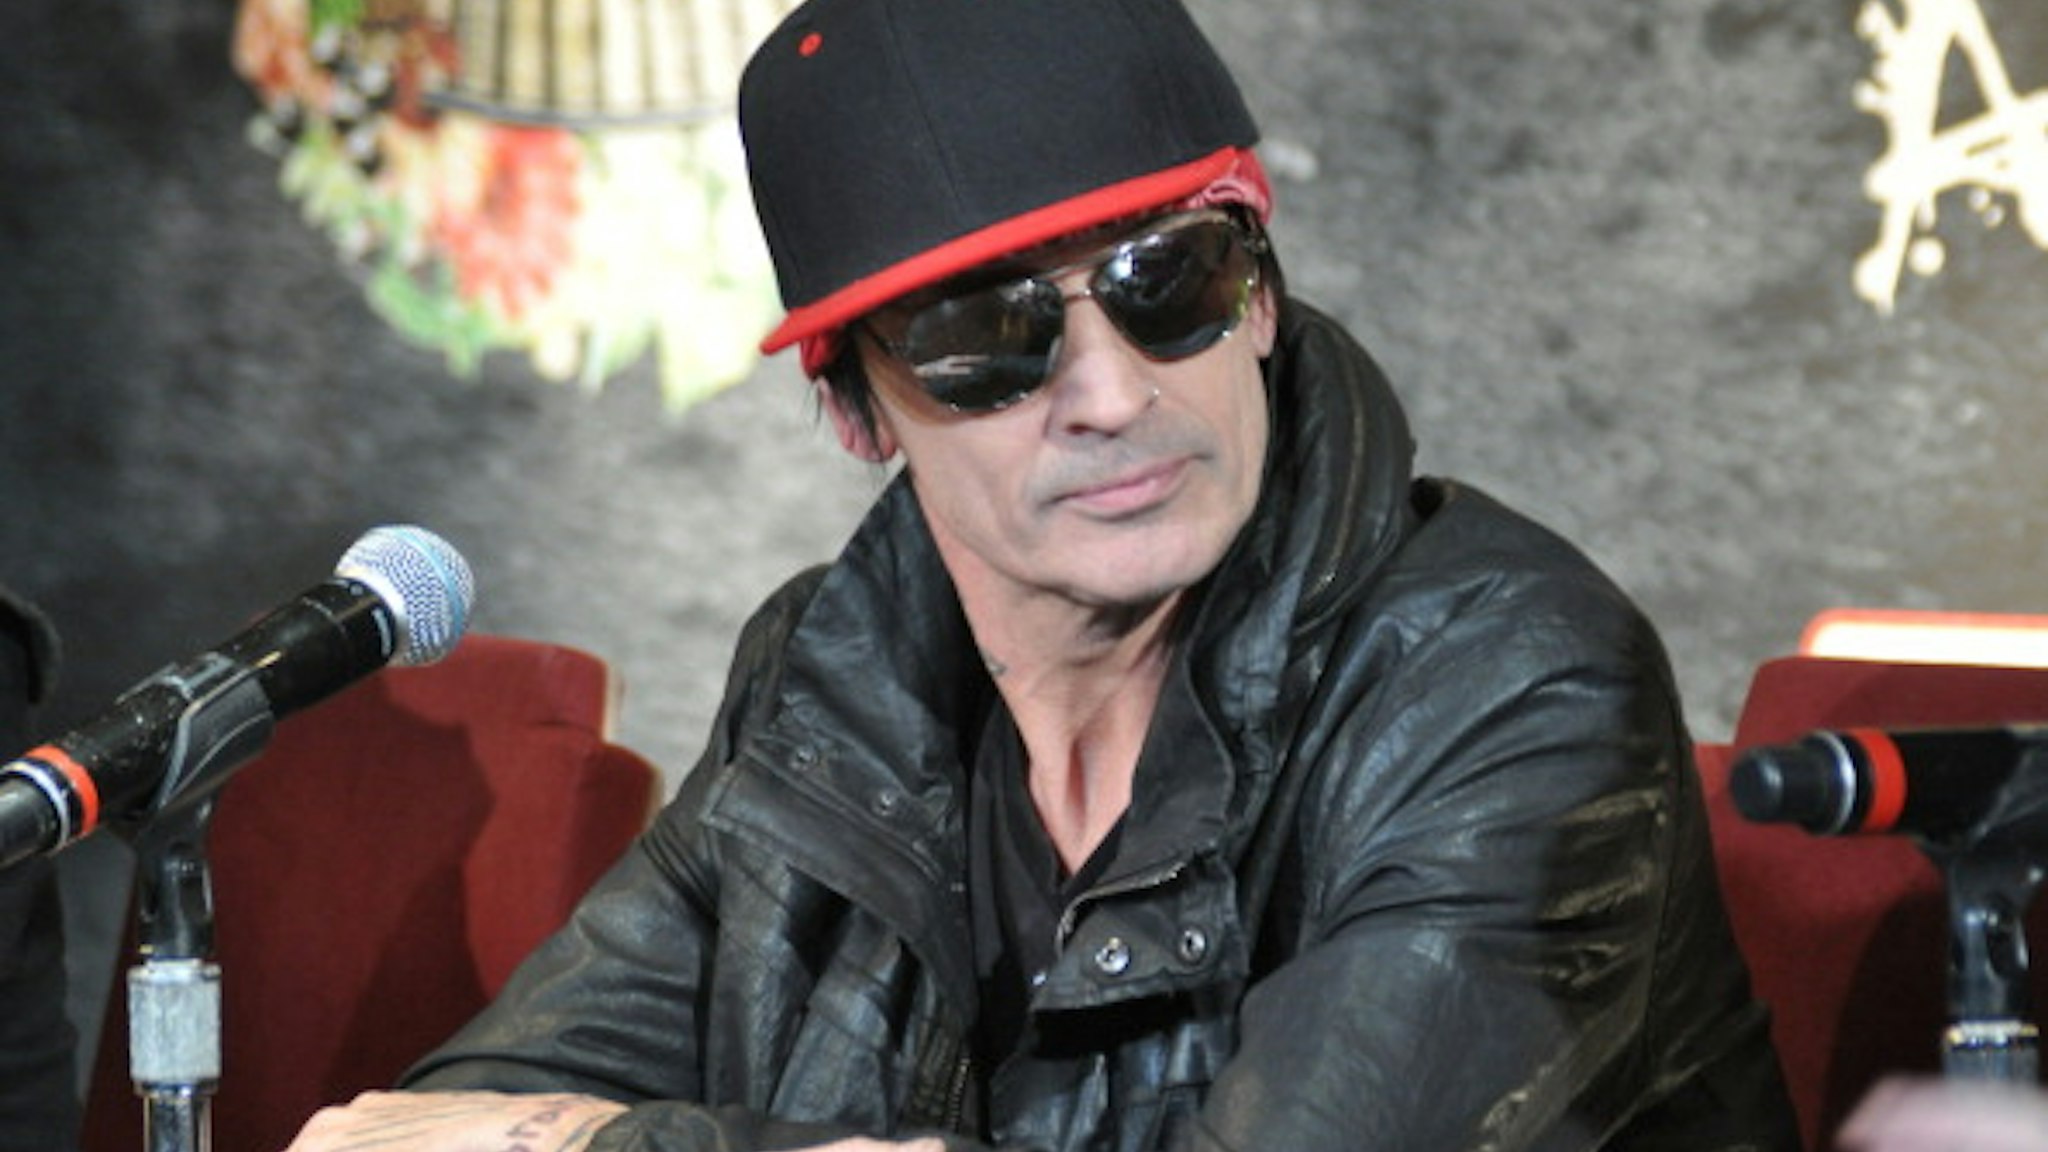 HOLLYWOOD, CA - JANUARY 28: Drummer Tommy Lee of rock band Motley Crue during a press conference announcing their farewell tour at Beacher's Madhouse on January 28, 2014 in Hollywood, California.